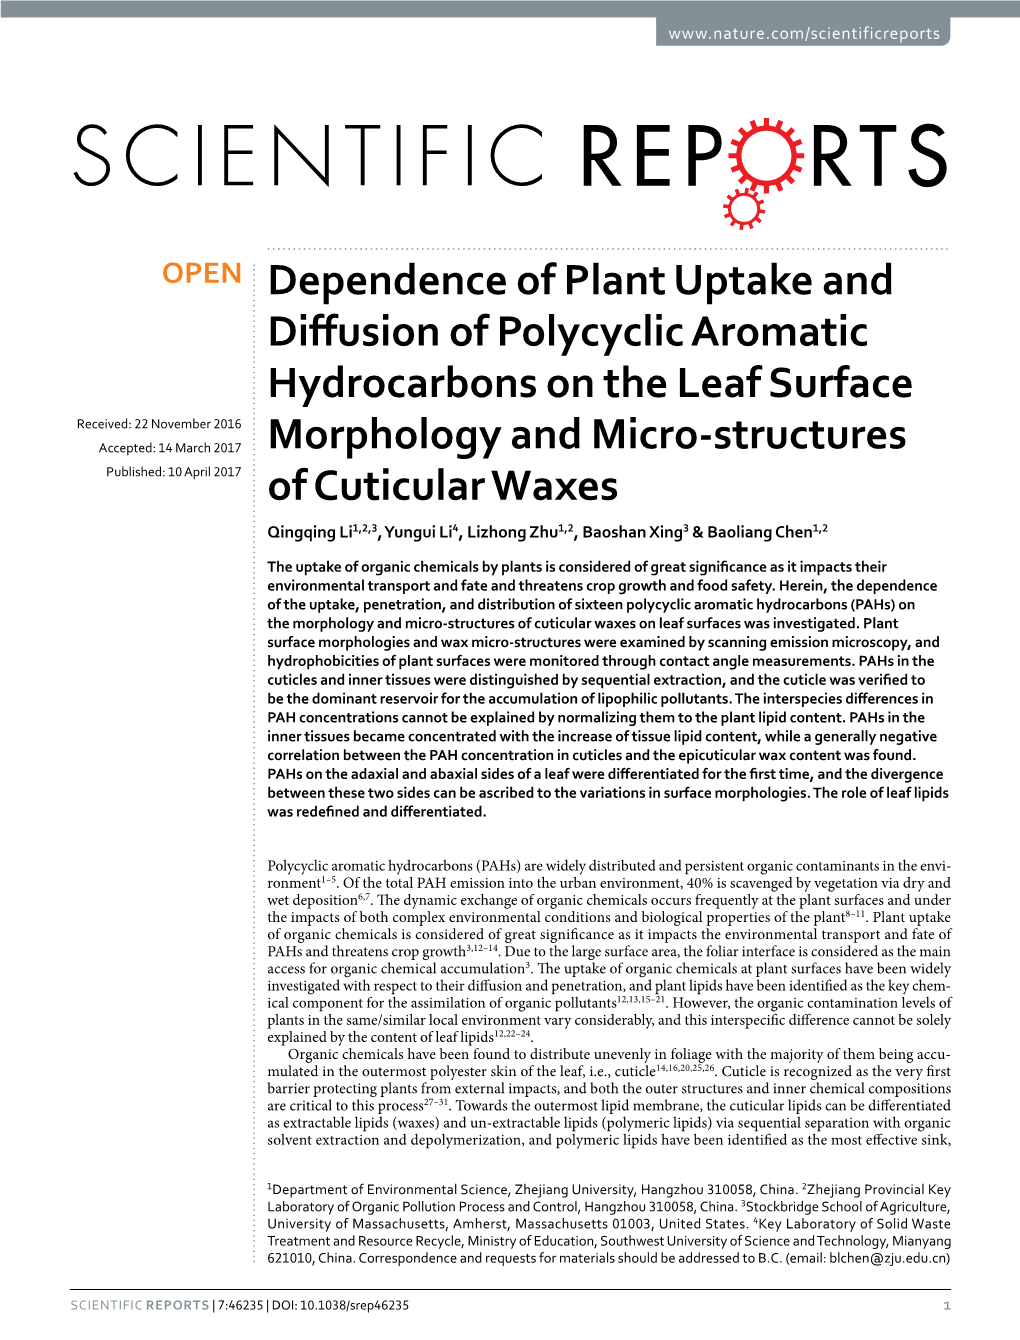 Dependence of Plant Uptake and Diffusion of Polycyclic Aromatic